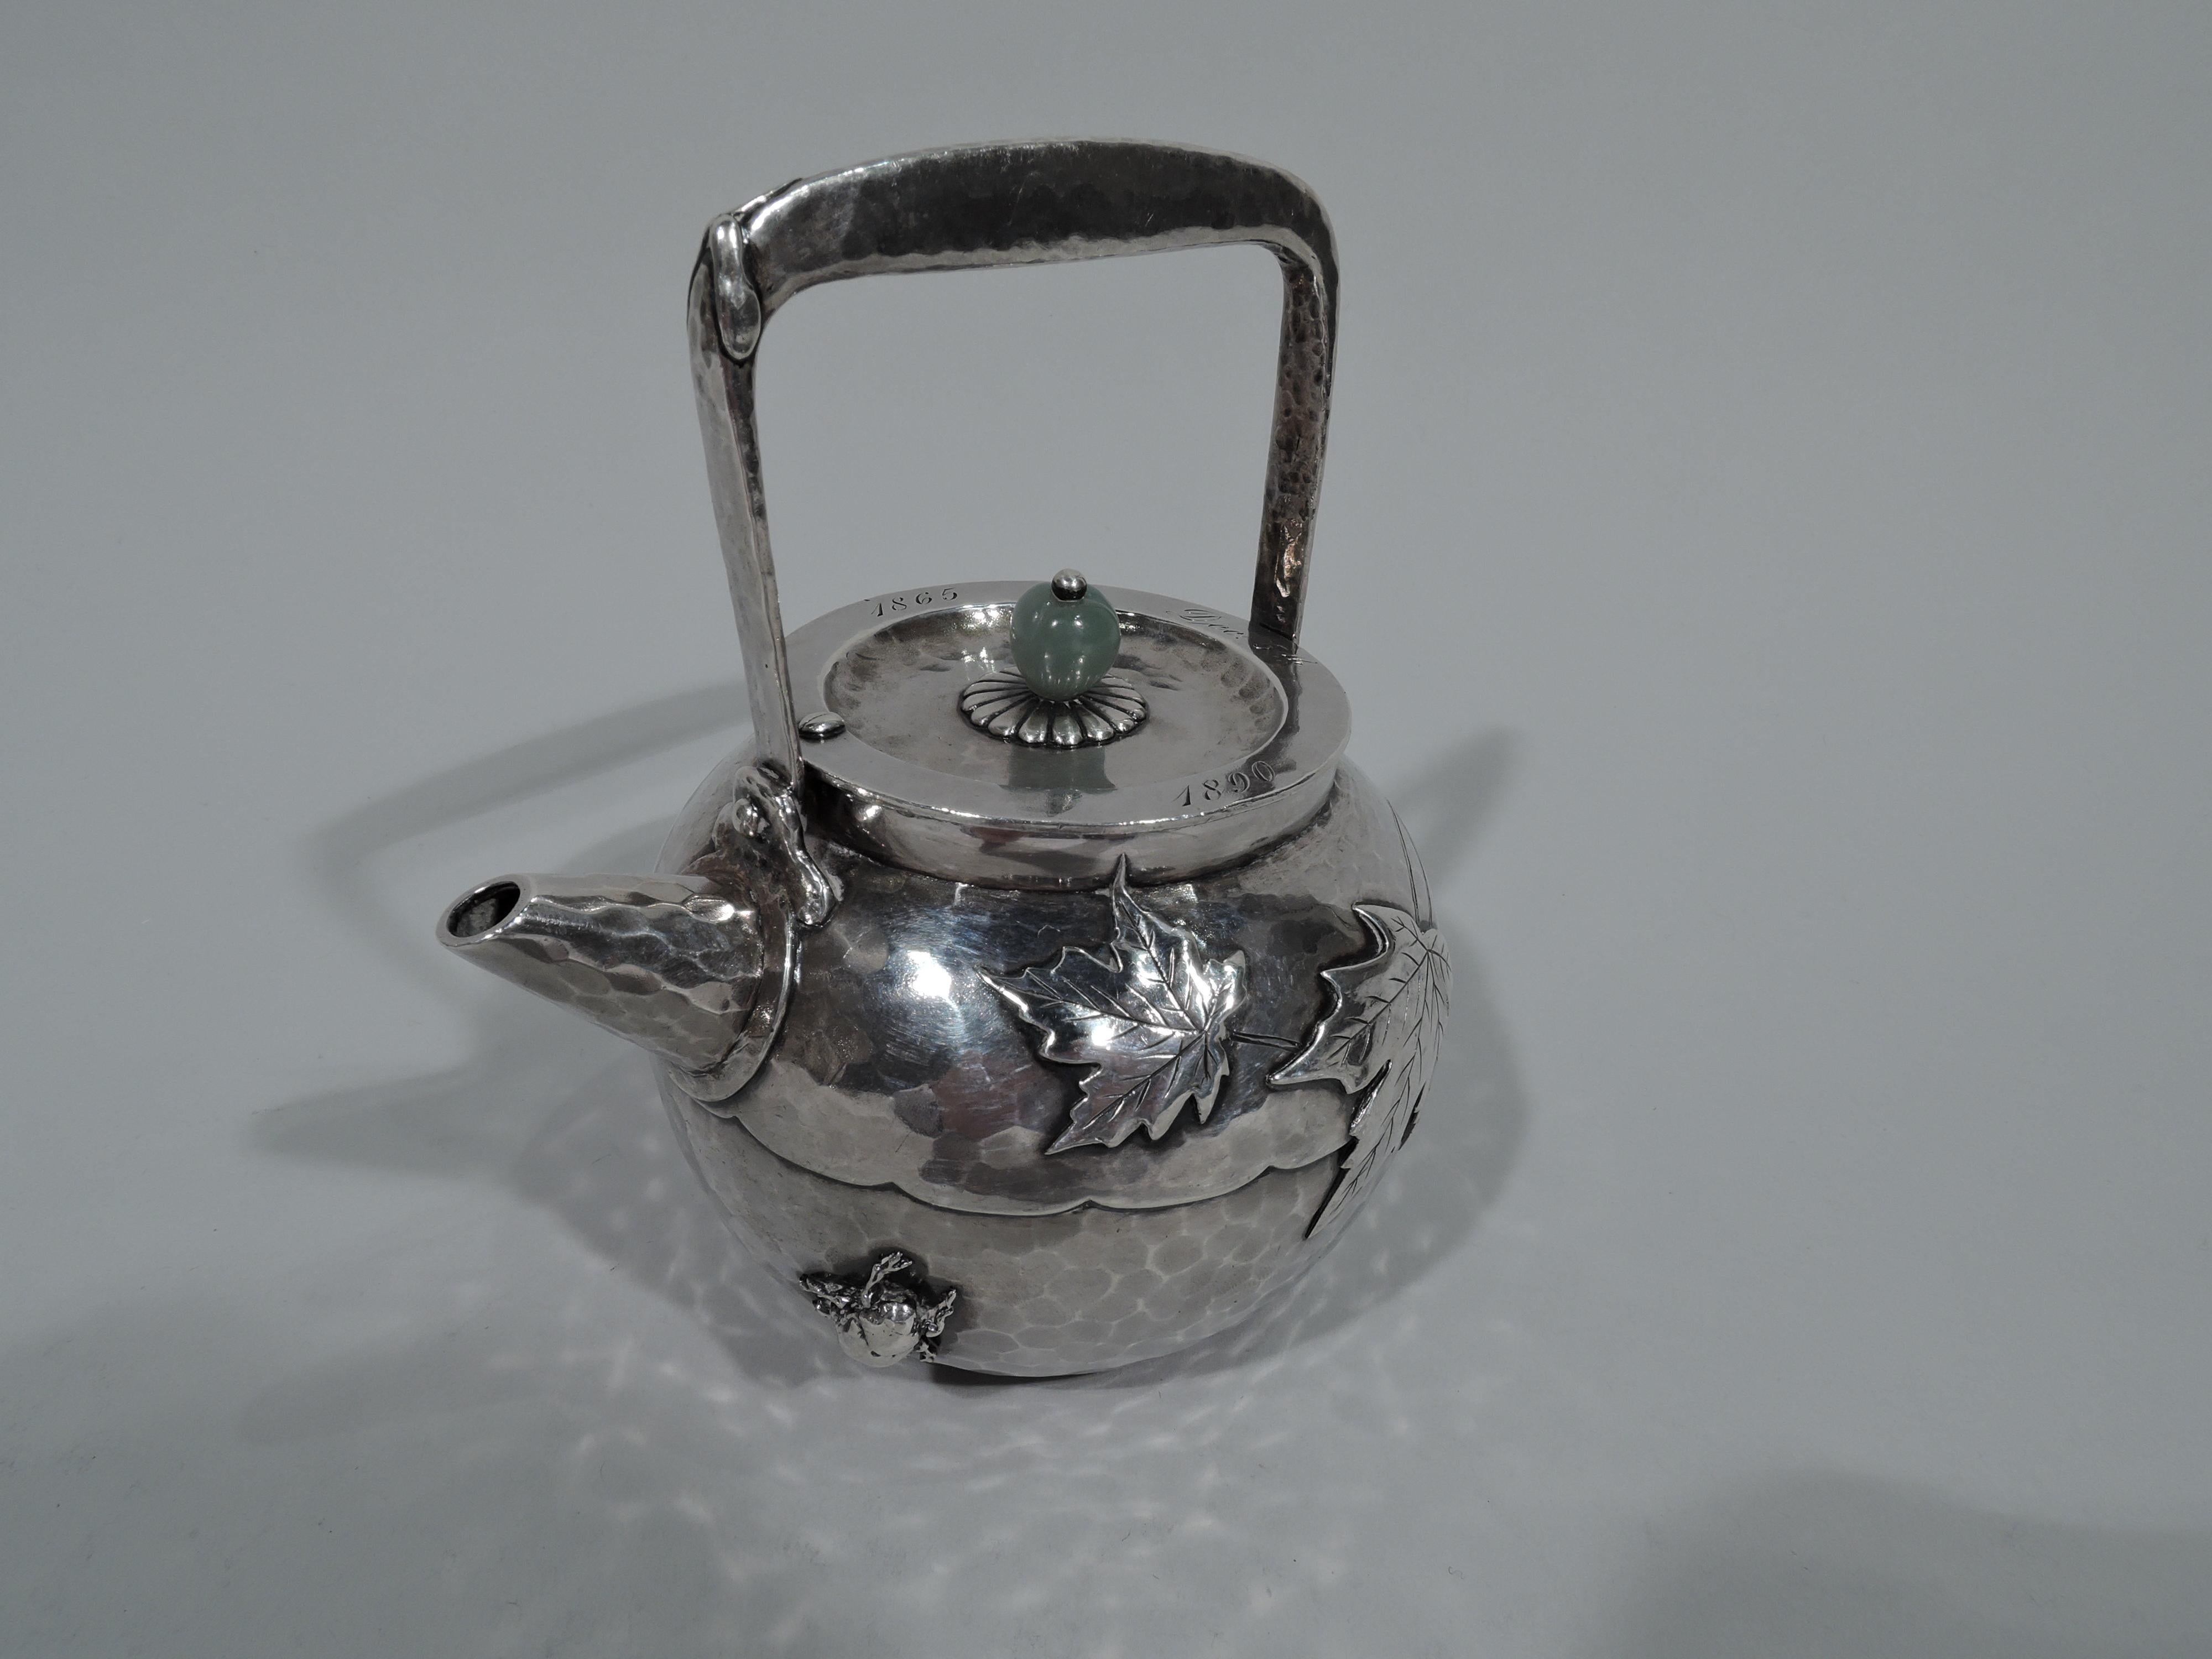 Japonesque sterling silver sake pot. Made by Tiffany & Co. in New York, circa 1880. Globular with short and tapering diagonal spout and stationary bracket handle. Cover inset with jade bead finial on petal mount. Allover honeycomb hand hammering.